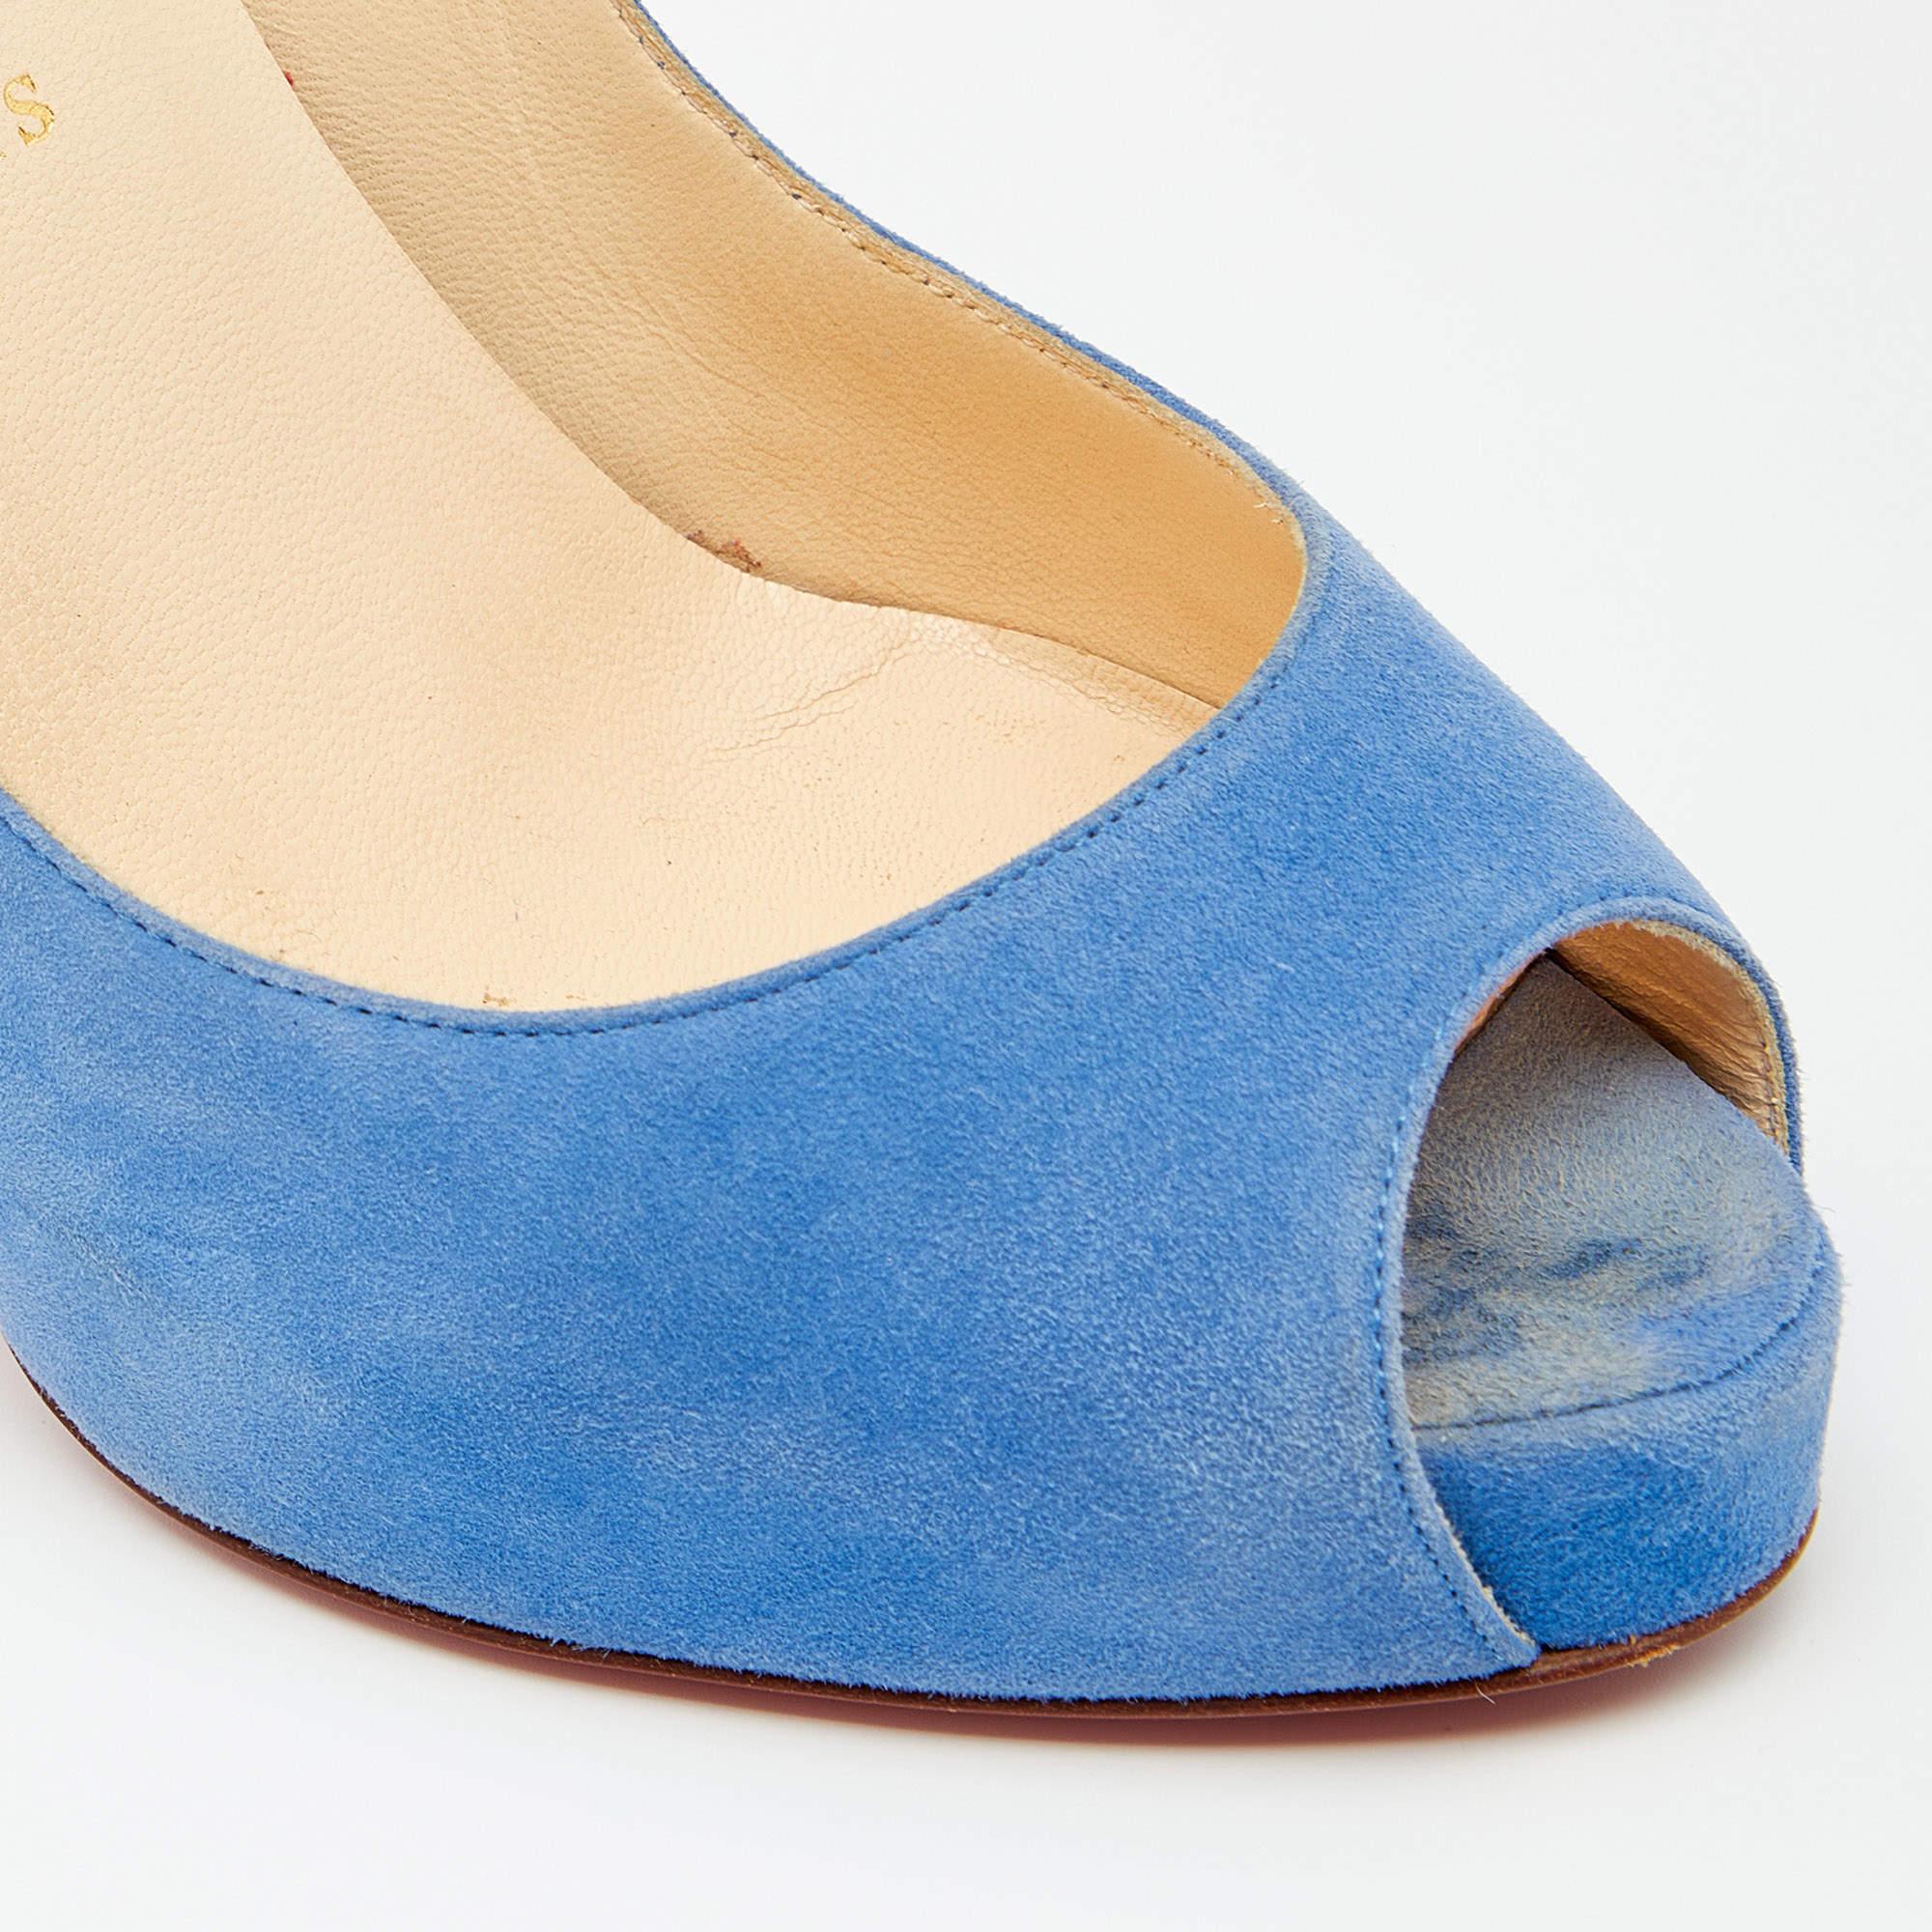 Christian Louboutin Blue Suede New Very Prive Peep Toe Pumps Size 36.5 2